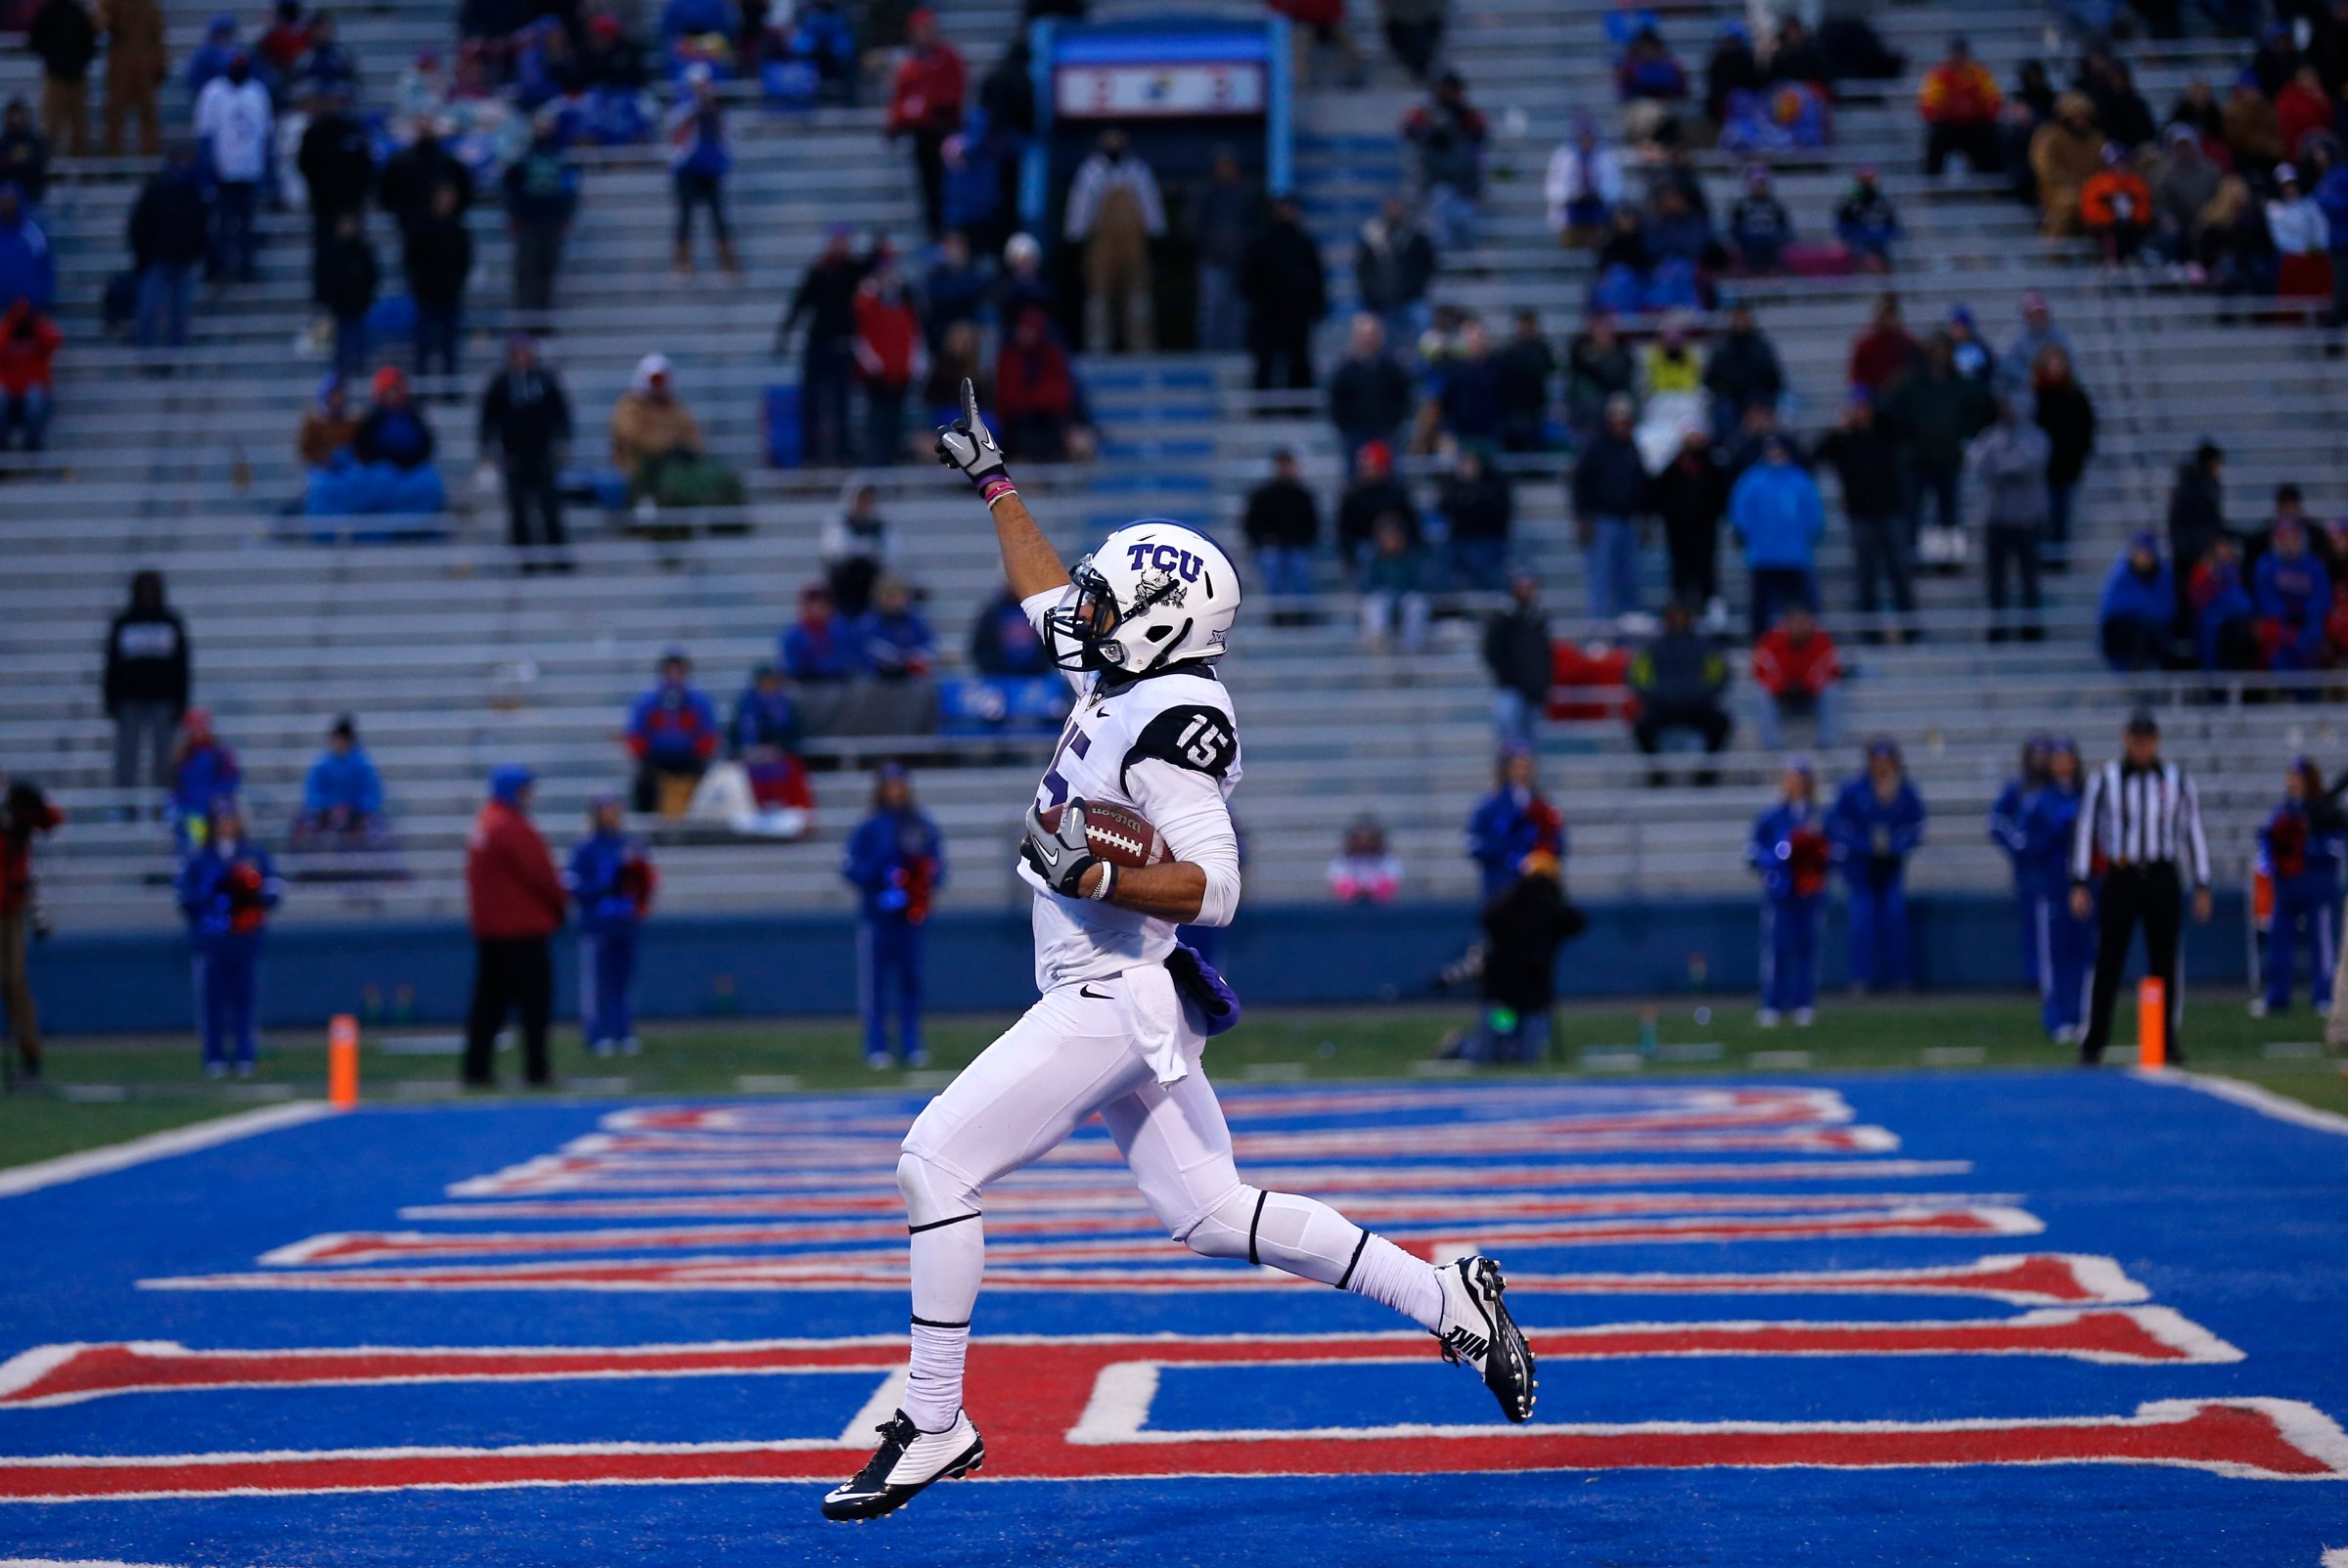 Cameron Echols-Luper of the TCU Horned Frogs celebrates his 69-yard punt return for a touchdown in the third quarter during a game against the Kansas Jayhawks at Memorial Stadium on Nov. 15, 2014 in Lawrence, Kansas.